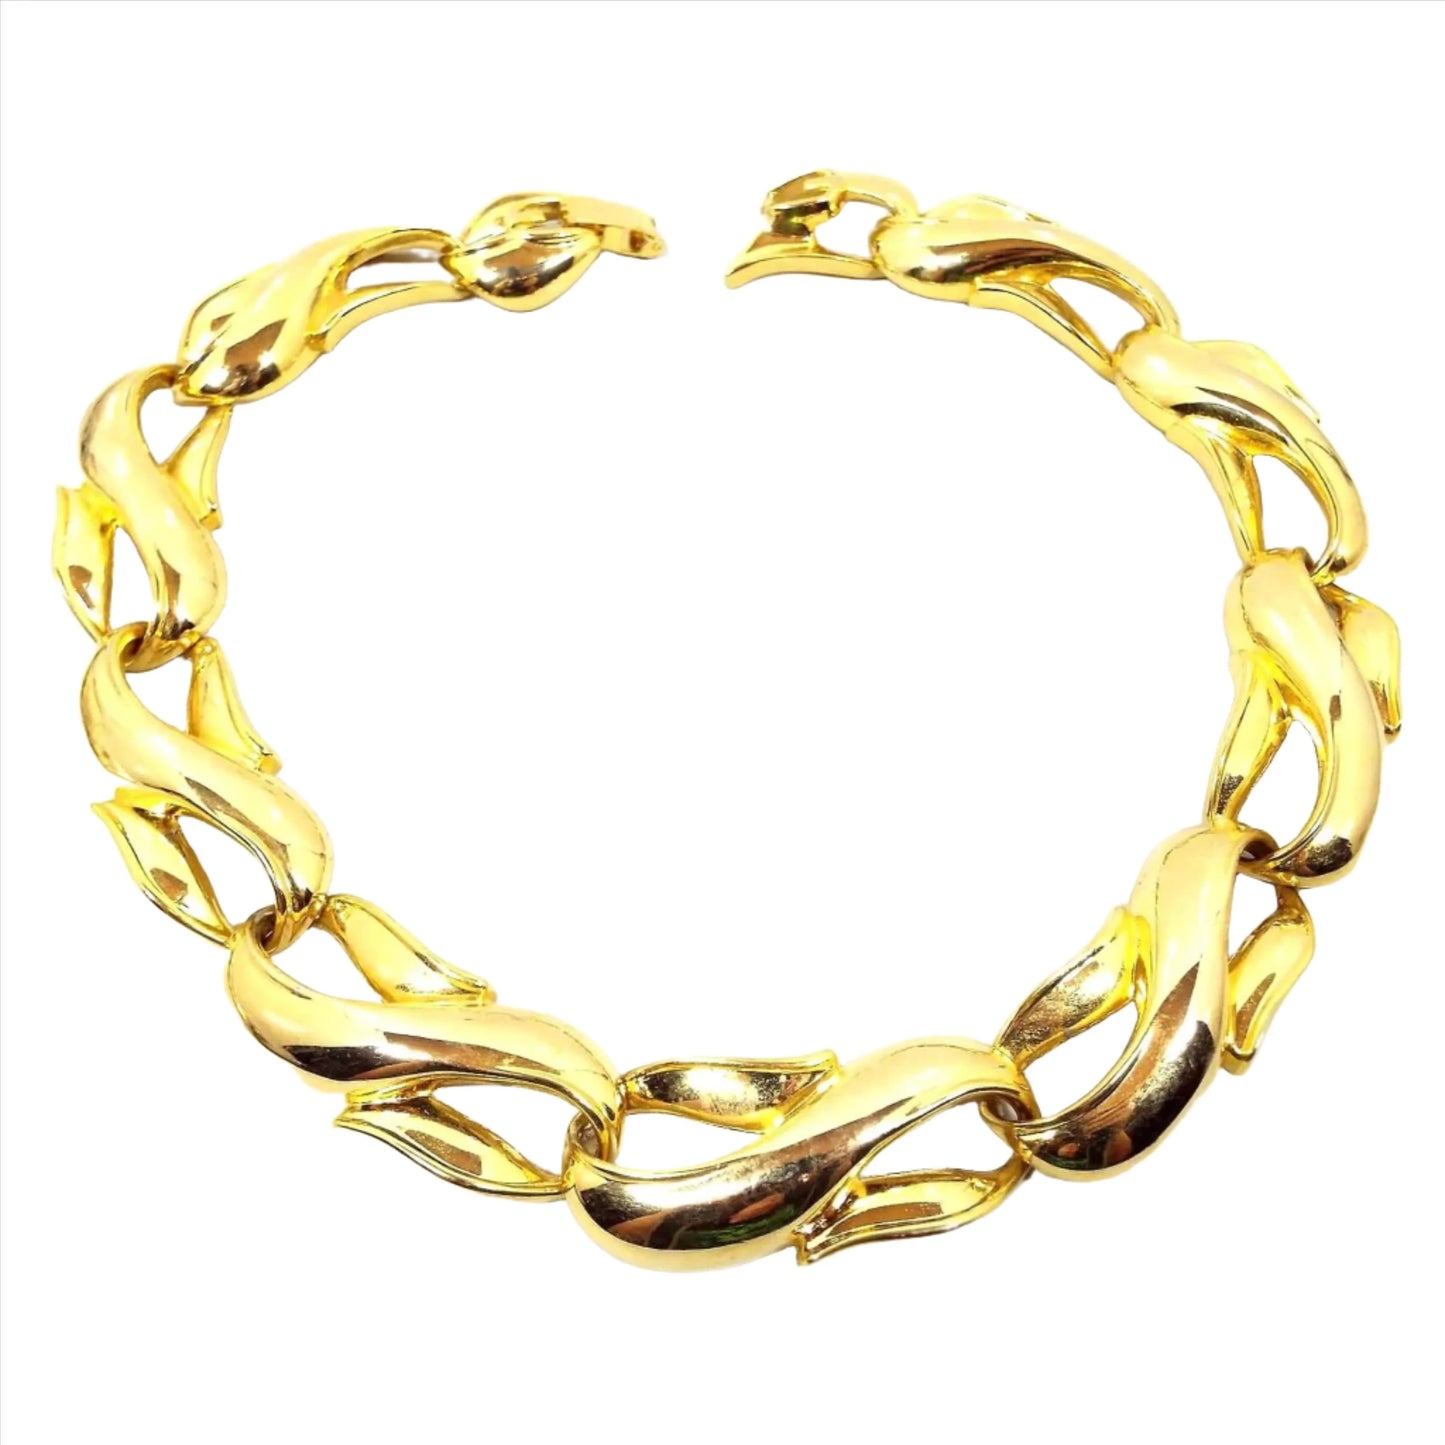 Front view of the retro vintage link necklace. It is gold tone in color with large wide sideways S shaped links. There is a snap lock clasp on the end.